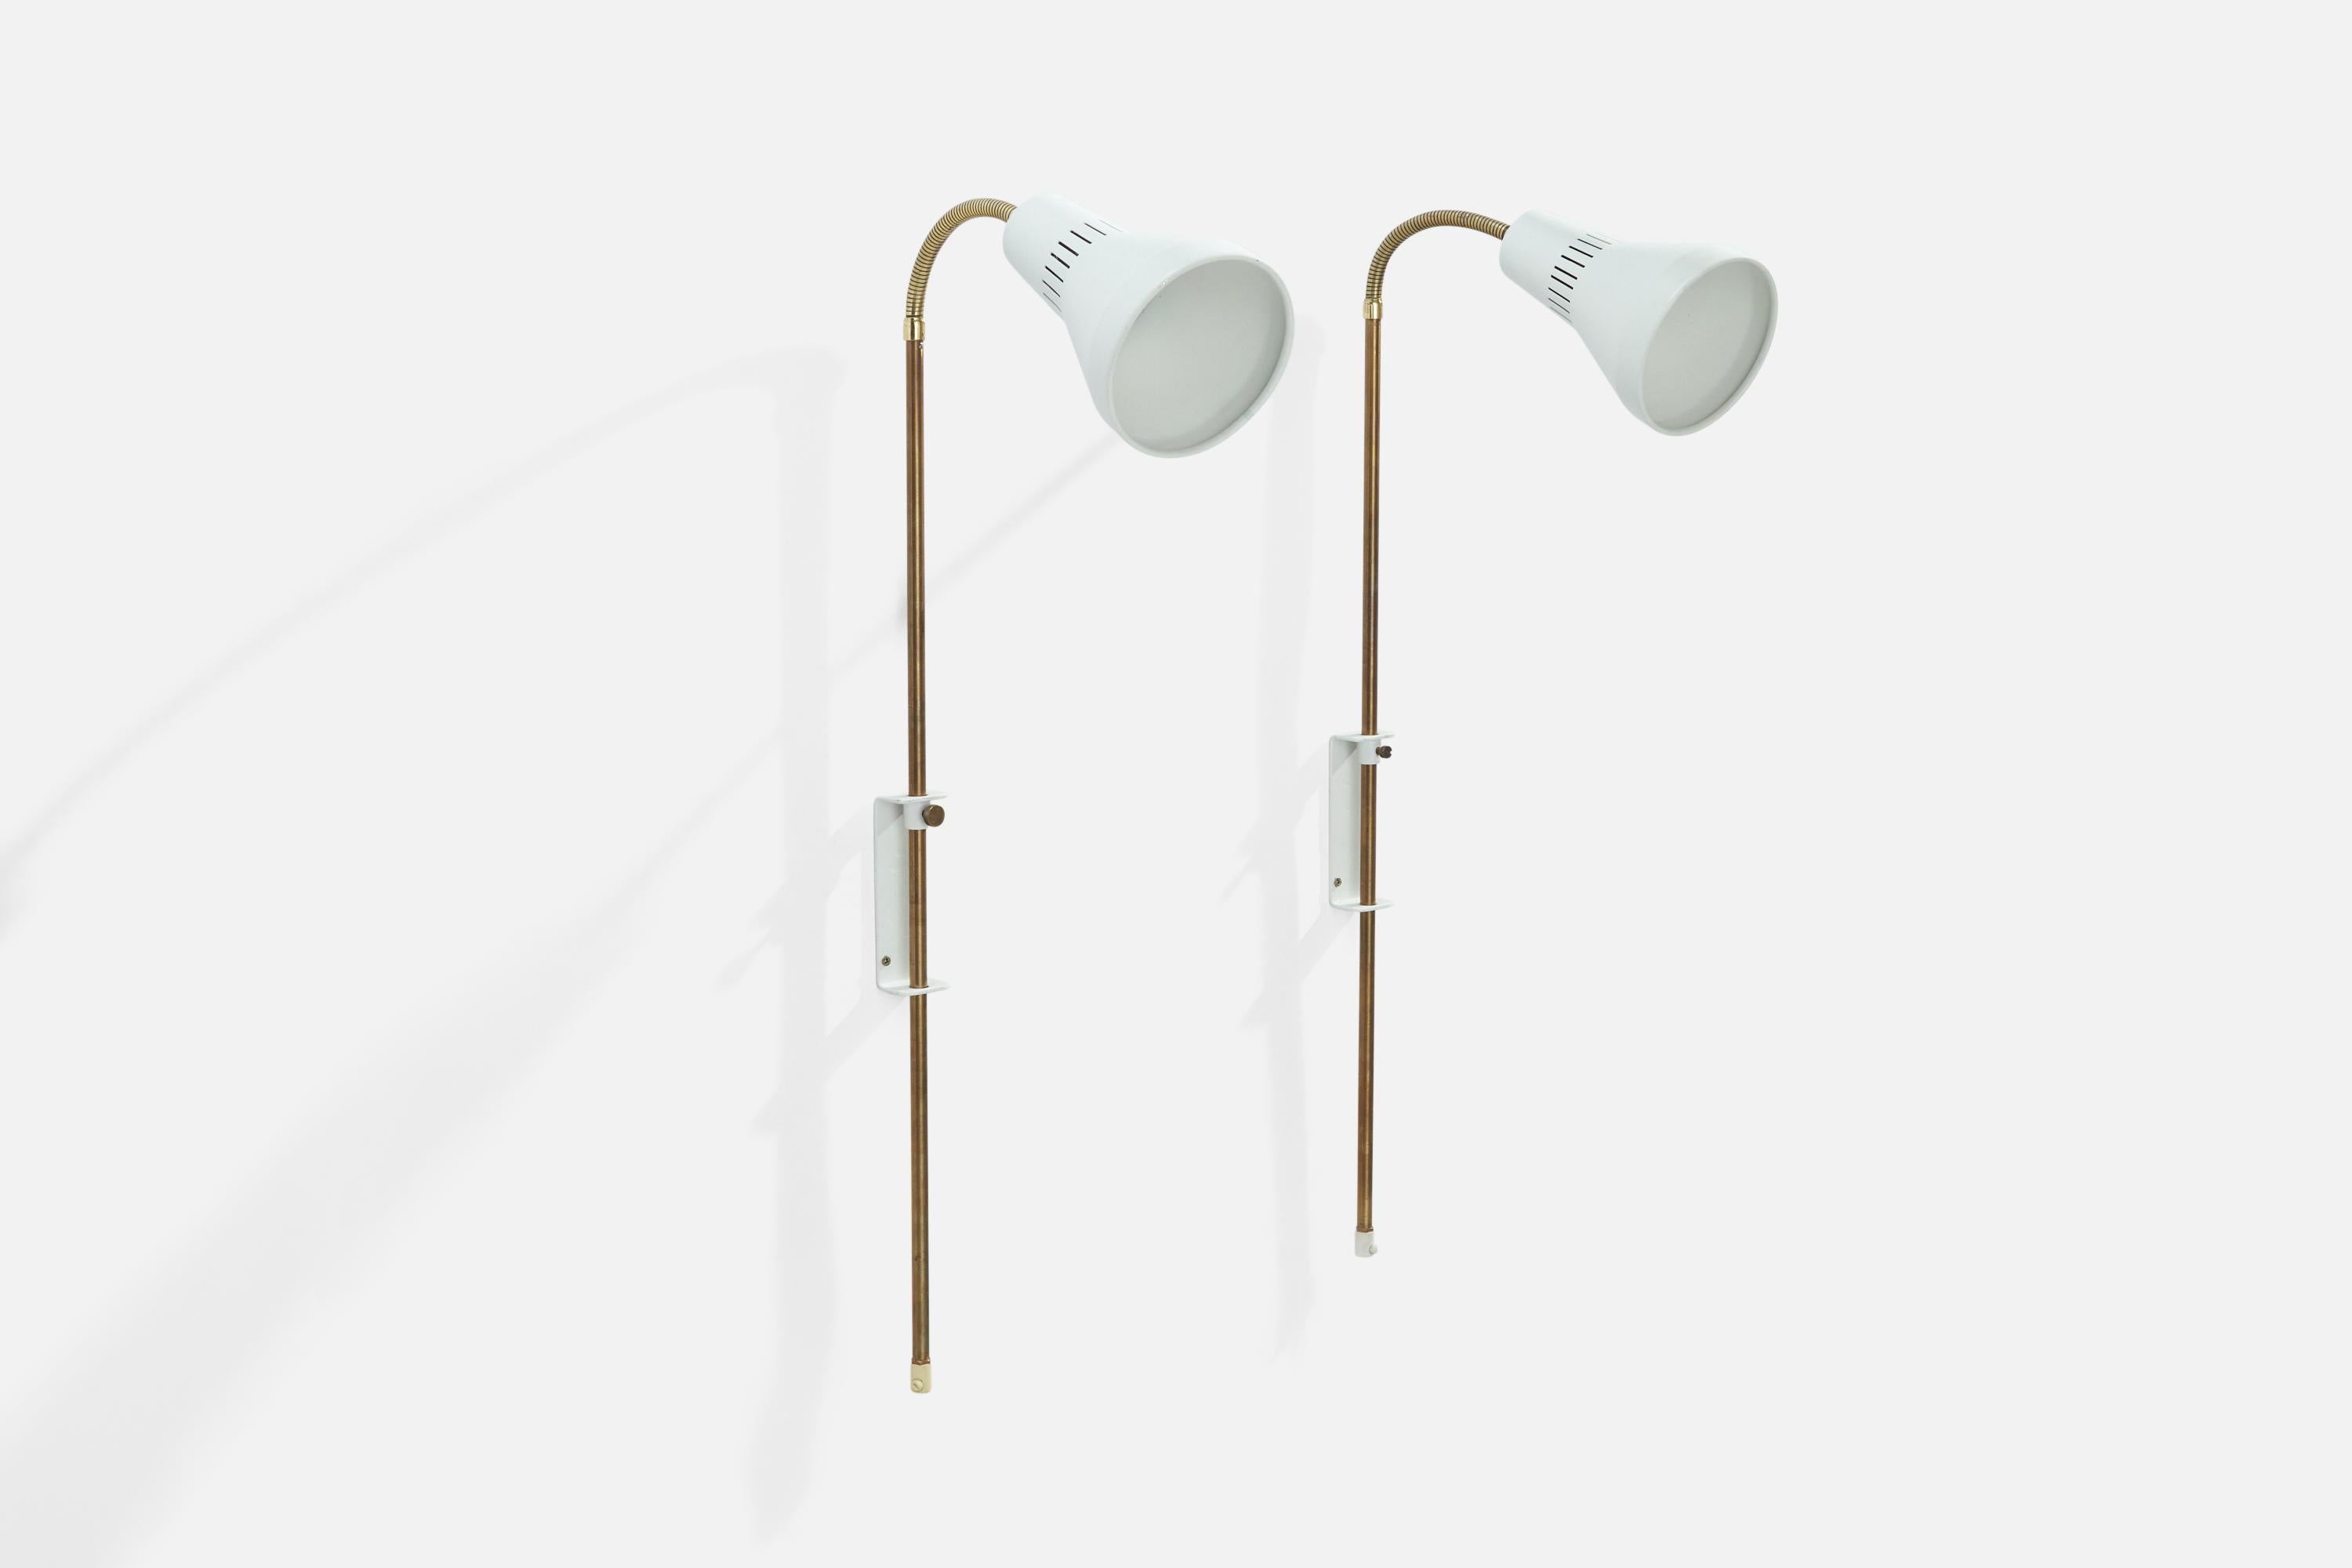 A pair of adjustable brass and white-lacquered metal wall lights designed and produced in Sweden, 1950s.

Dimensions variable.
Overall Dimensions (inches): 42”  H x 5” W x 11”  D
Back Plate Dimensions (inches): 5” H x 1.5”  W x 1.25” D
Bulb